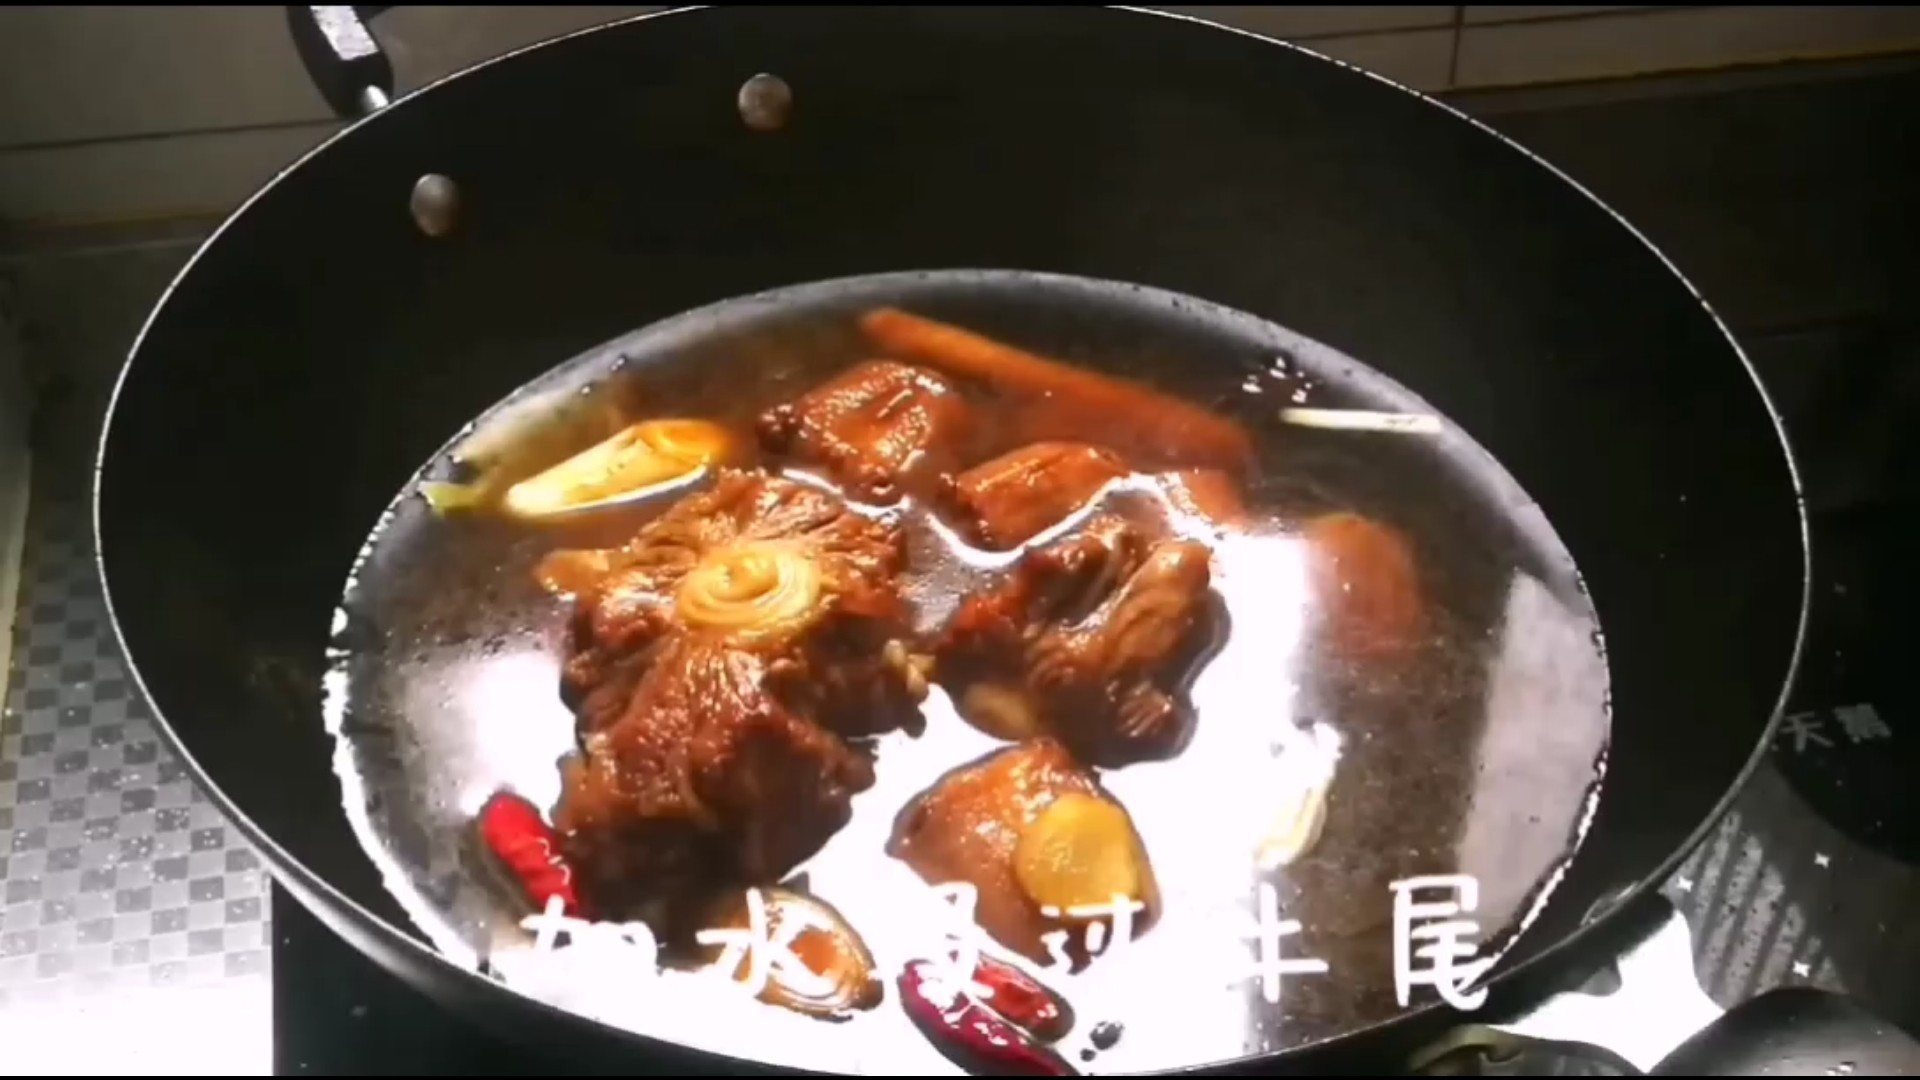 Braised Oxtail recipe